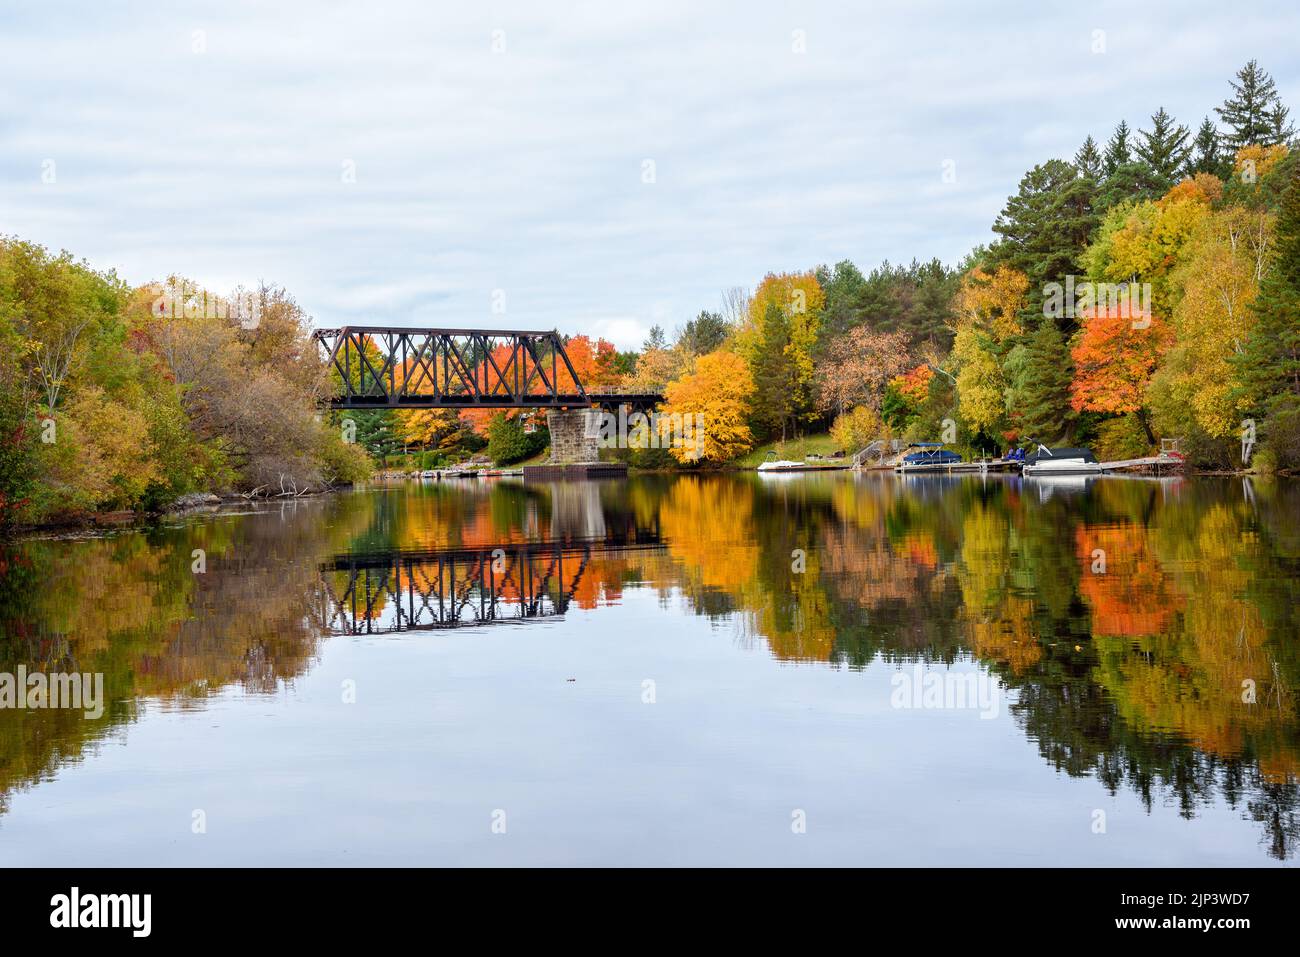 View of a steel railroad bridge spanning a river with forested banks at the peak of autumn colours. Reflection in water. Stock Photo